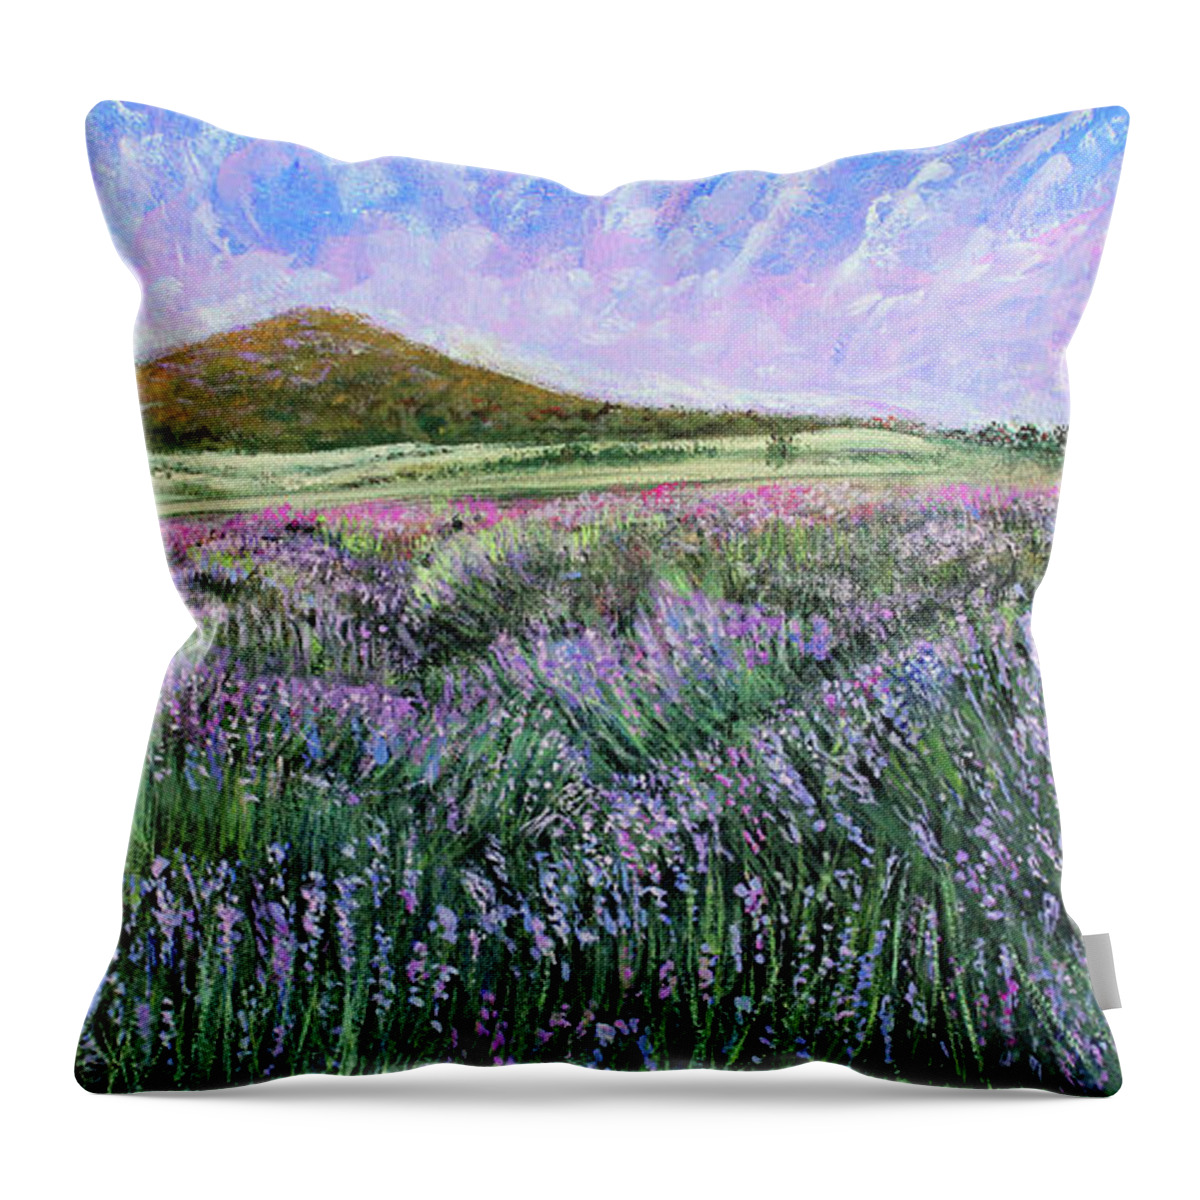 Landscape Throw Pillow featuring the painting Lavender Field Vista by Lyric Lucas